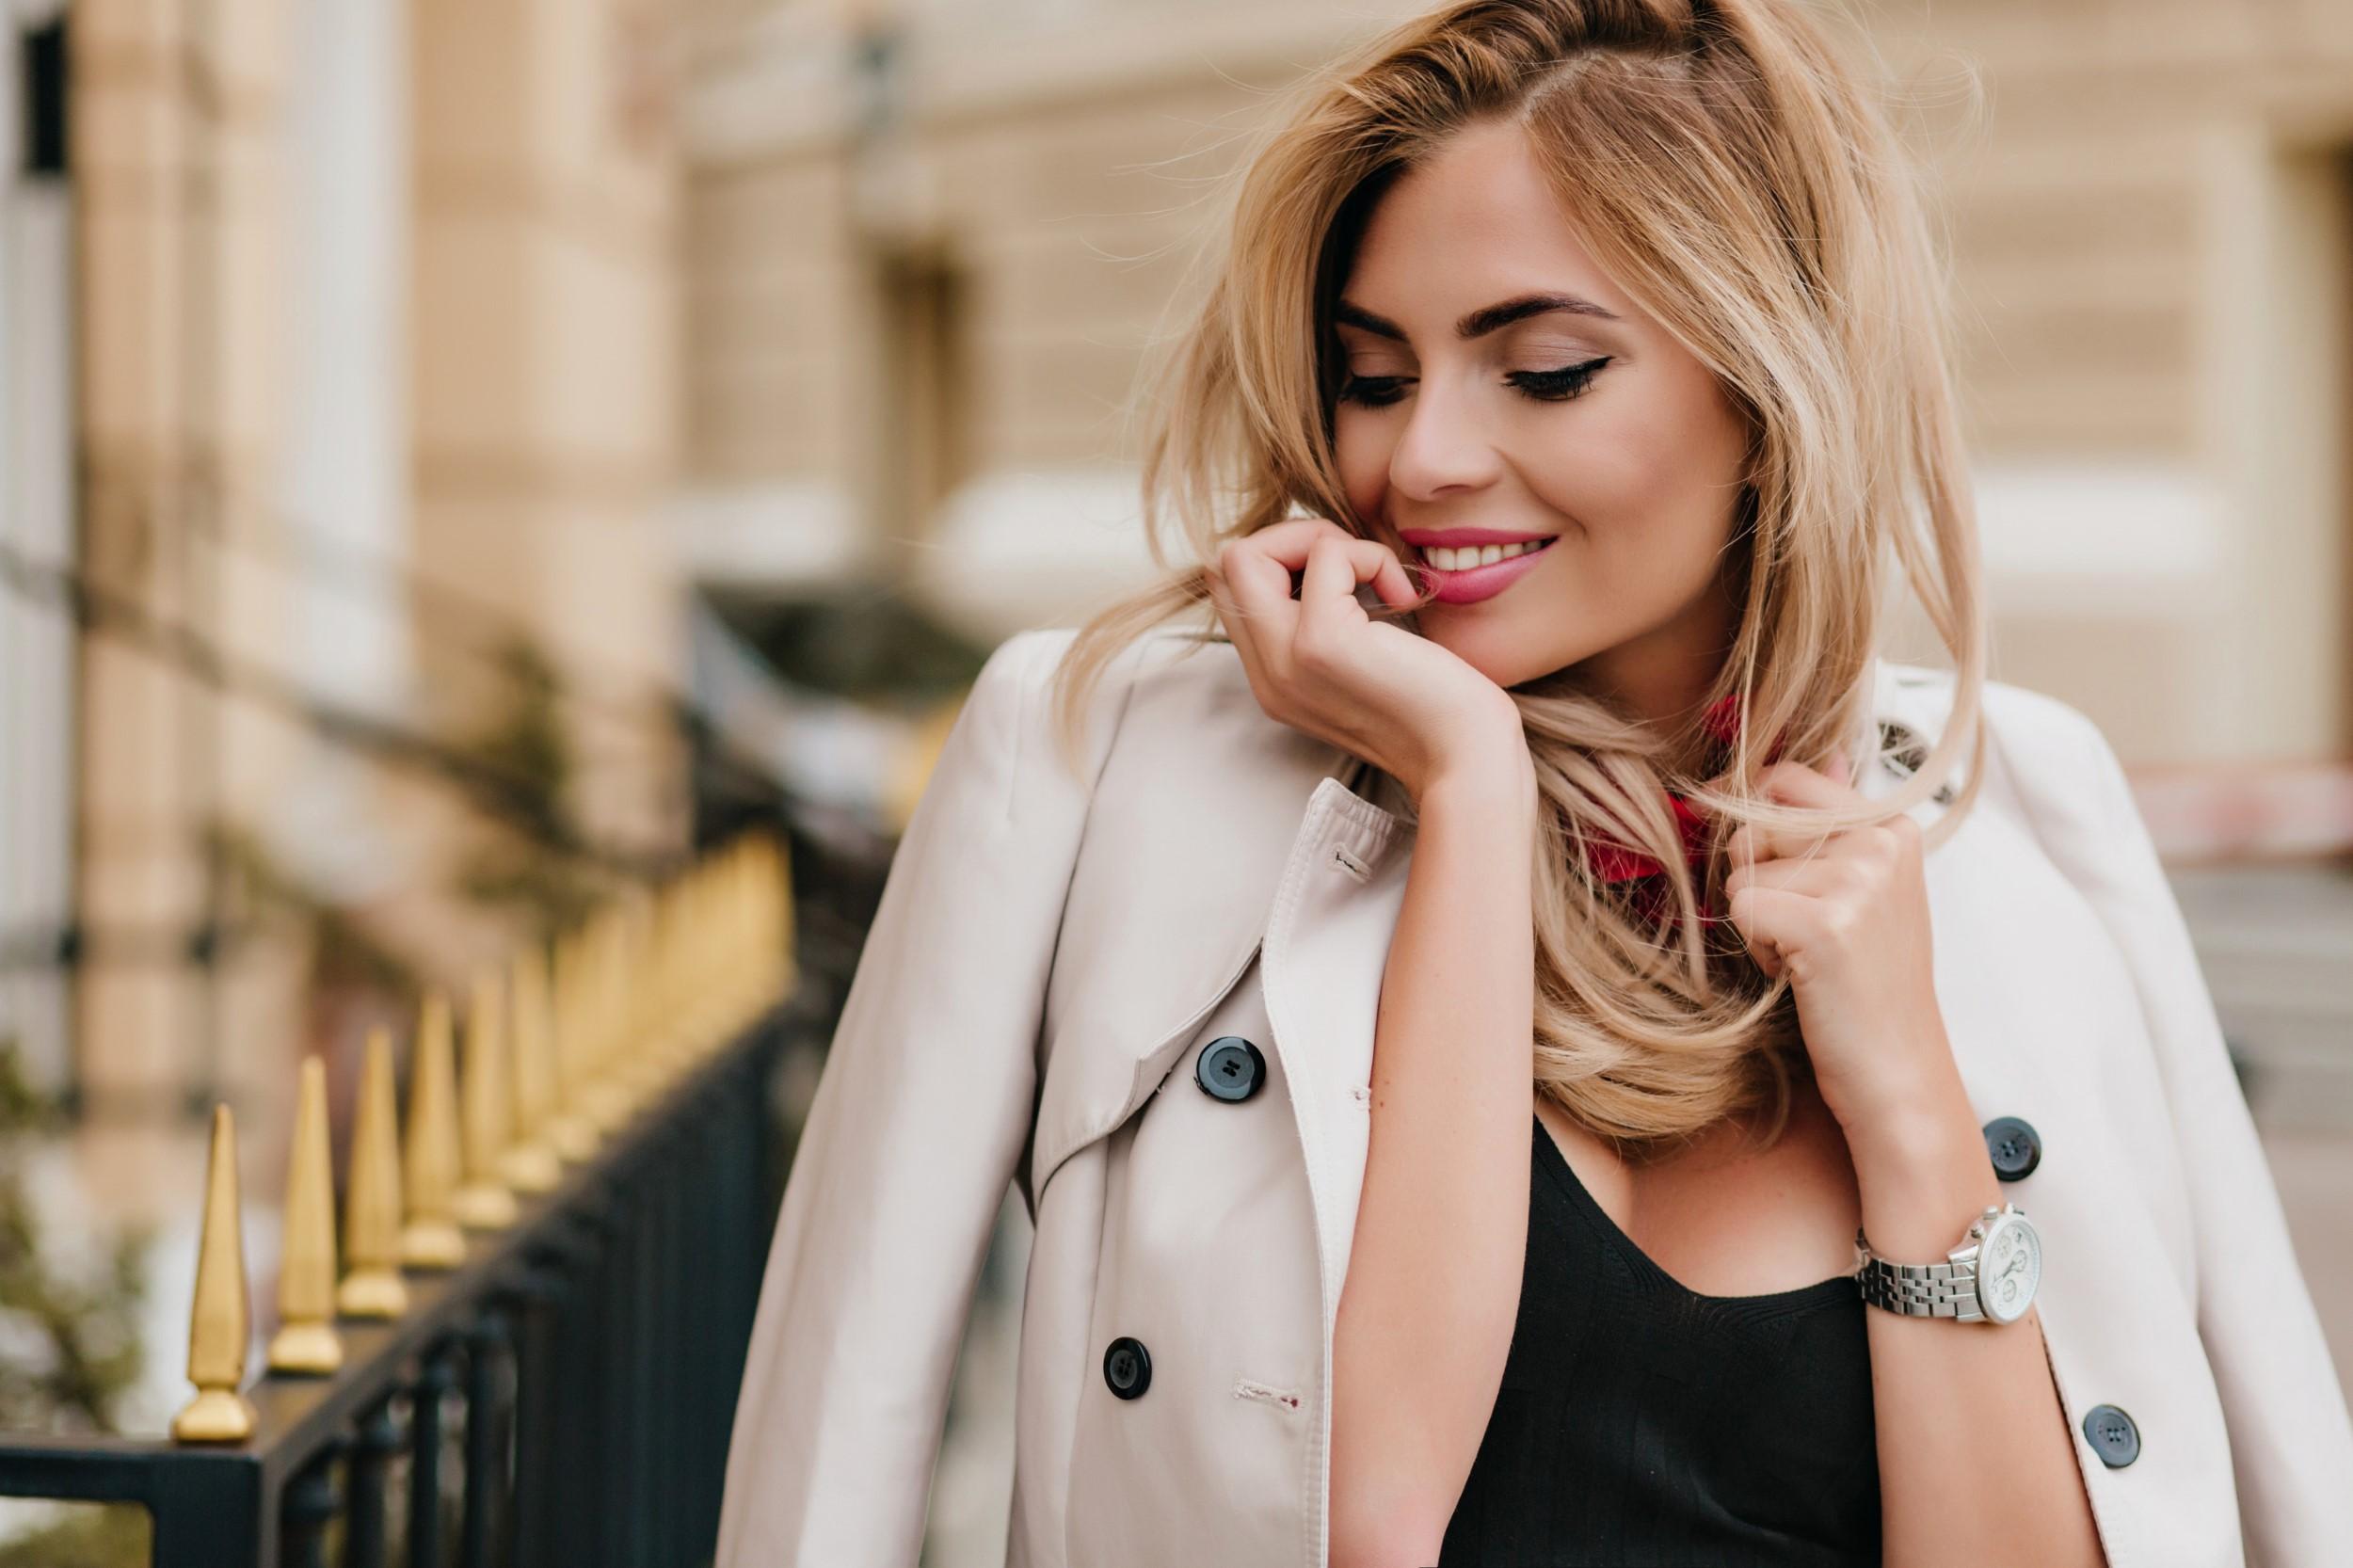 blissful lightly tanned european lady wears stylish jacket having fun after work day laughing close up outdoor photo charming female model with elegant hairstyle enjoying good morning Stylistka